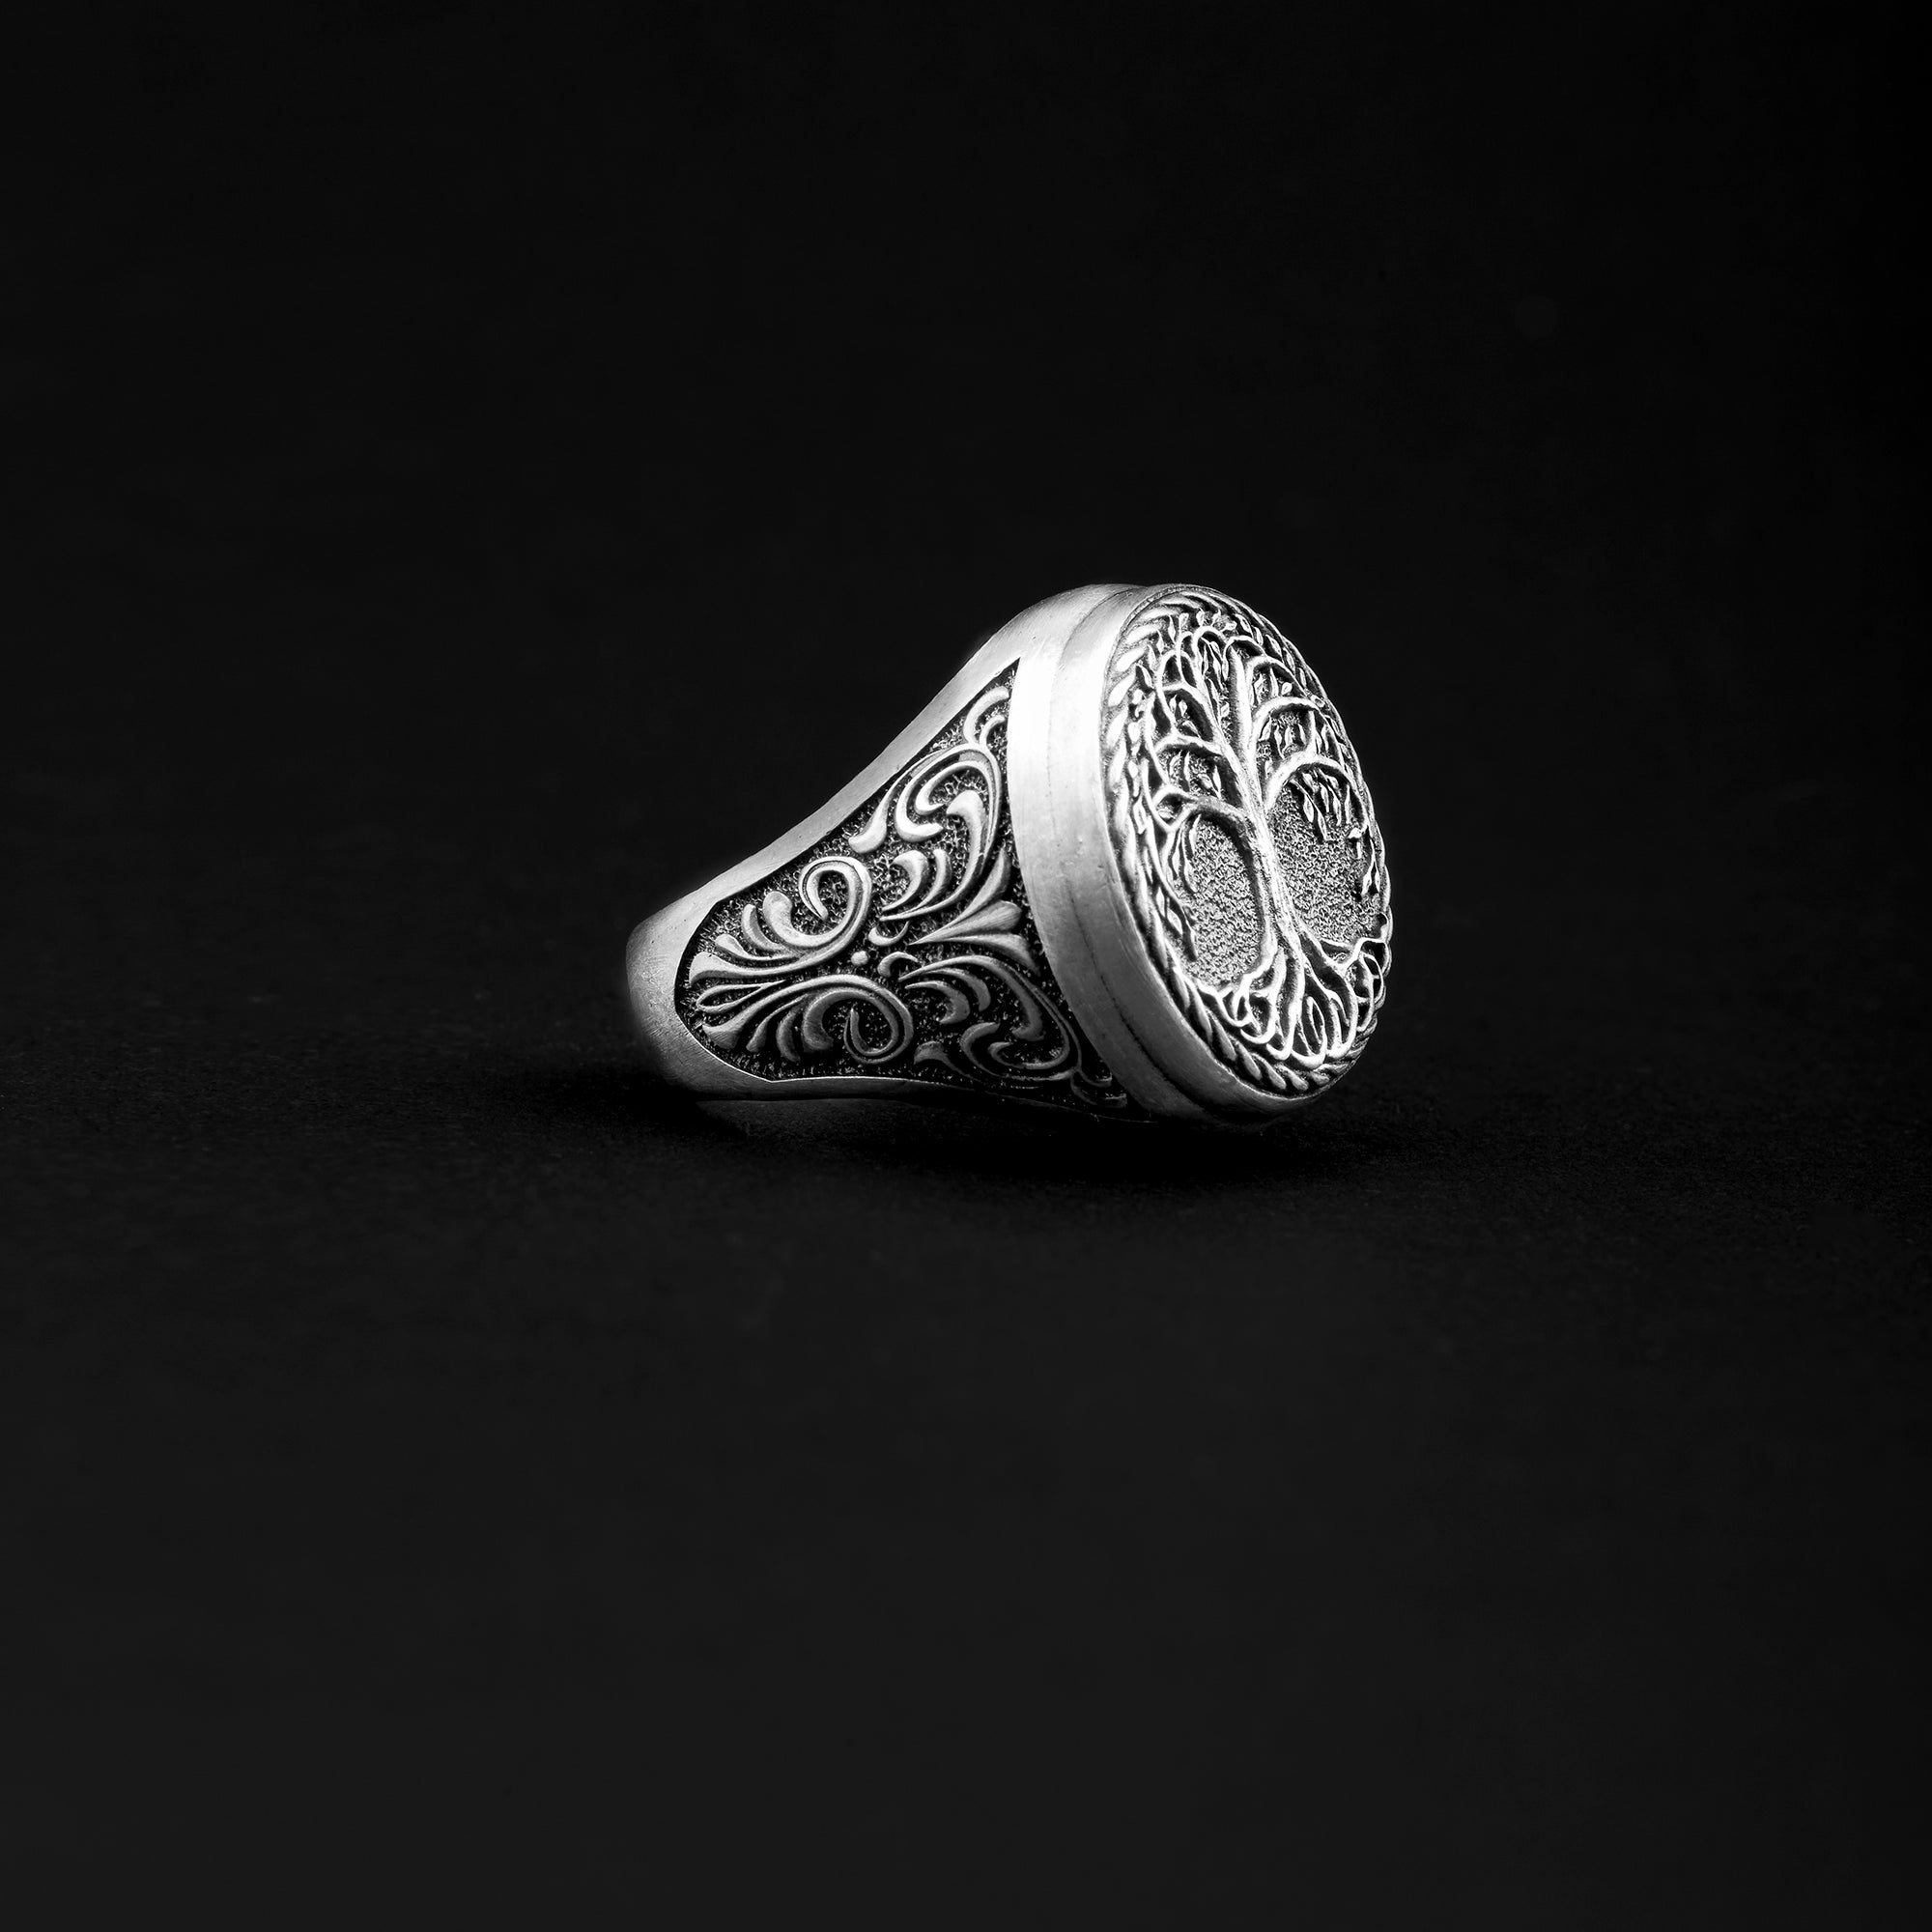 Yggdrasil Ring | The Tree Of Life